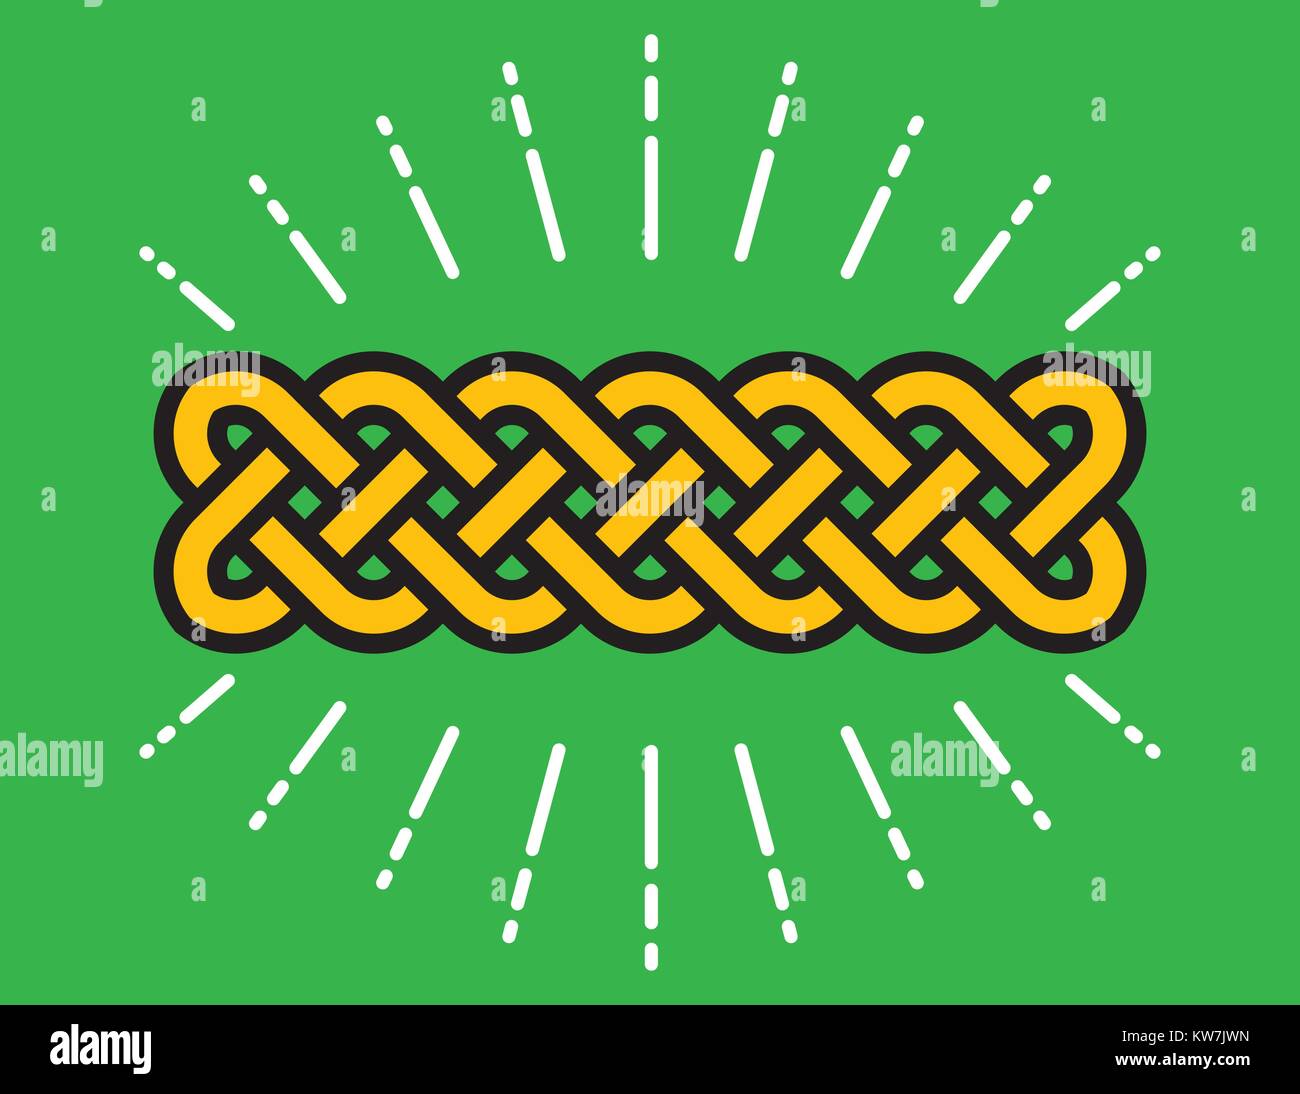 Celtic Infinity Knot Vector Design. Classic knot design symbolizing eternity and symmetry with radiating lines around it. Stock Vector